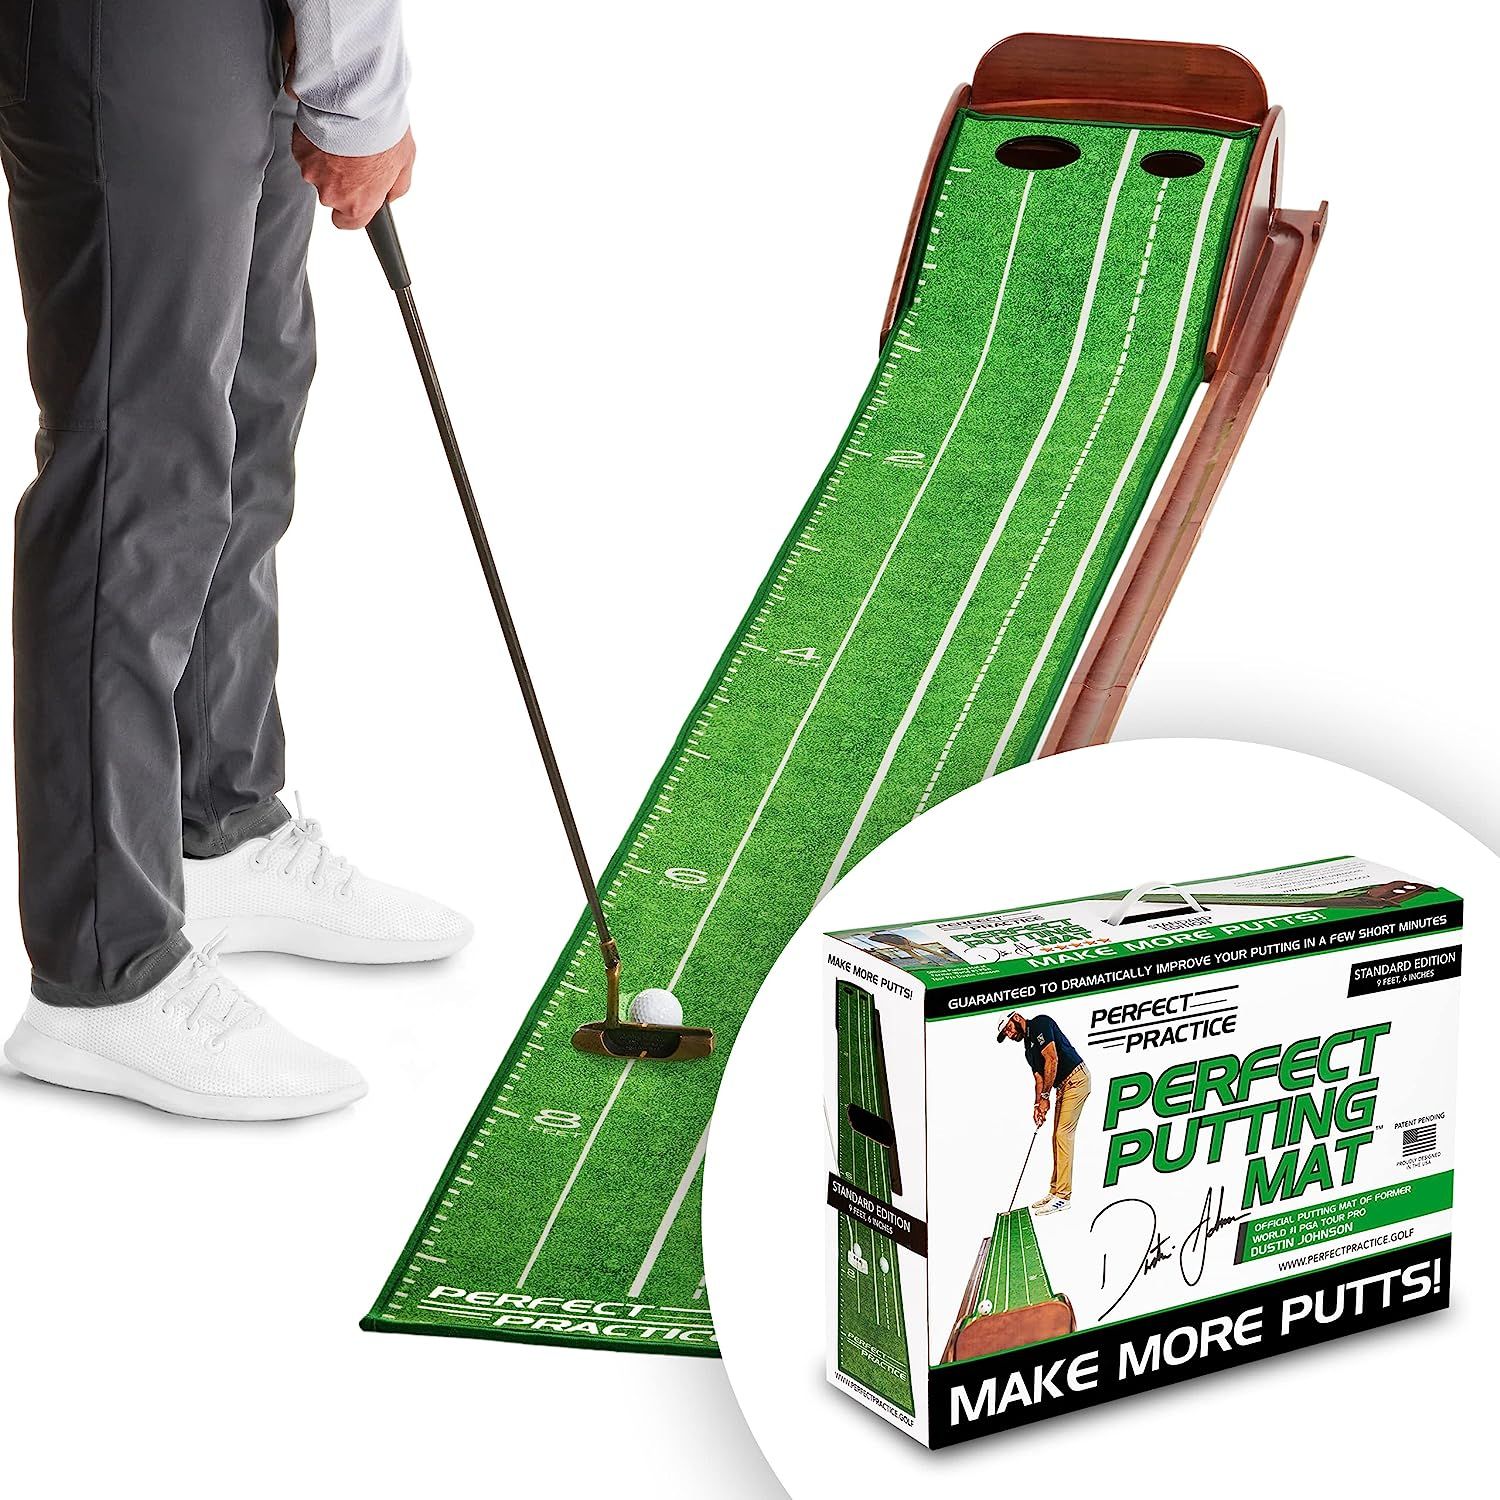 PERFECT PRACTICE Putting Mat - Indoor Golf Putting Green with 1/2 Hole Training for Mini Games & ... | Amazon (US)